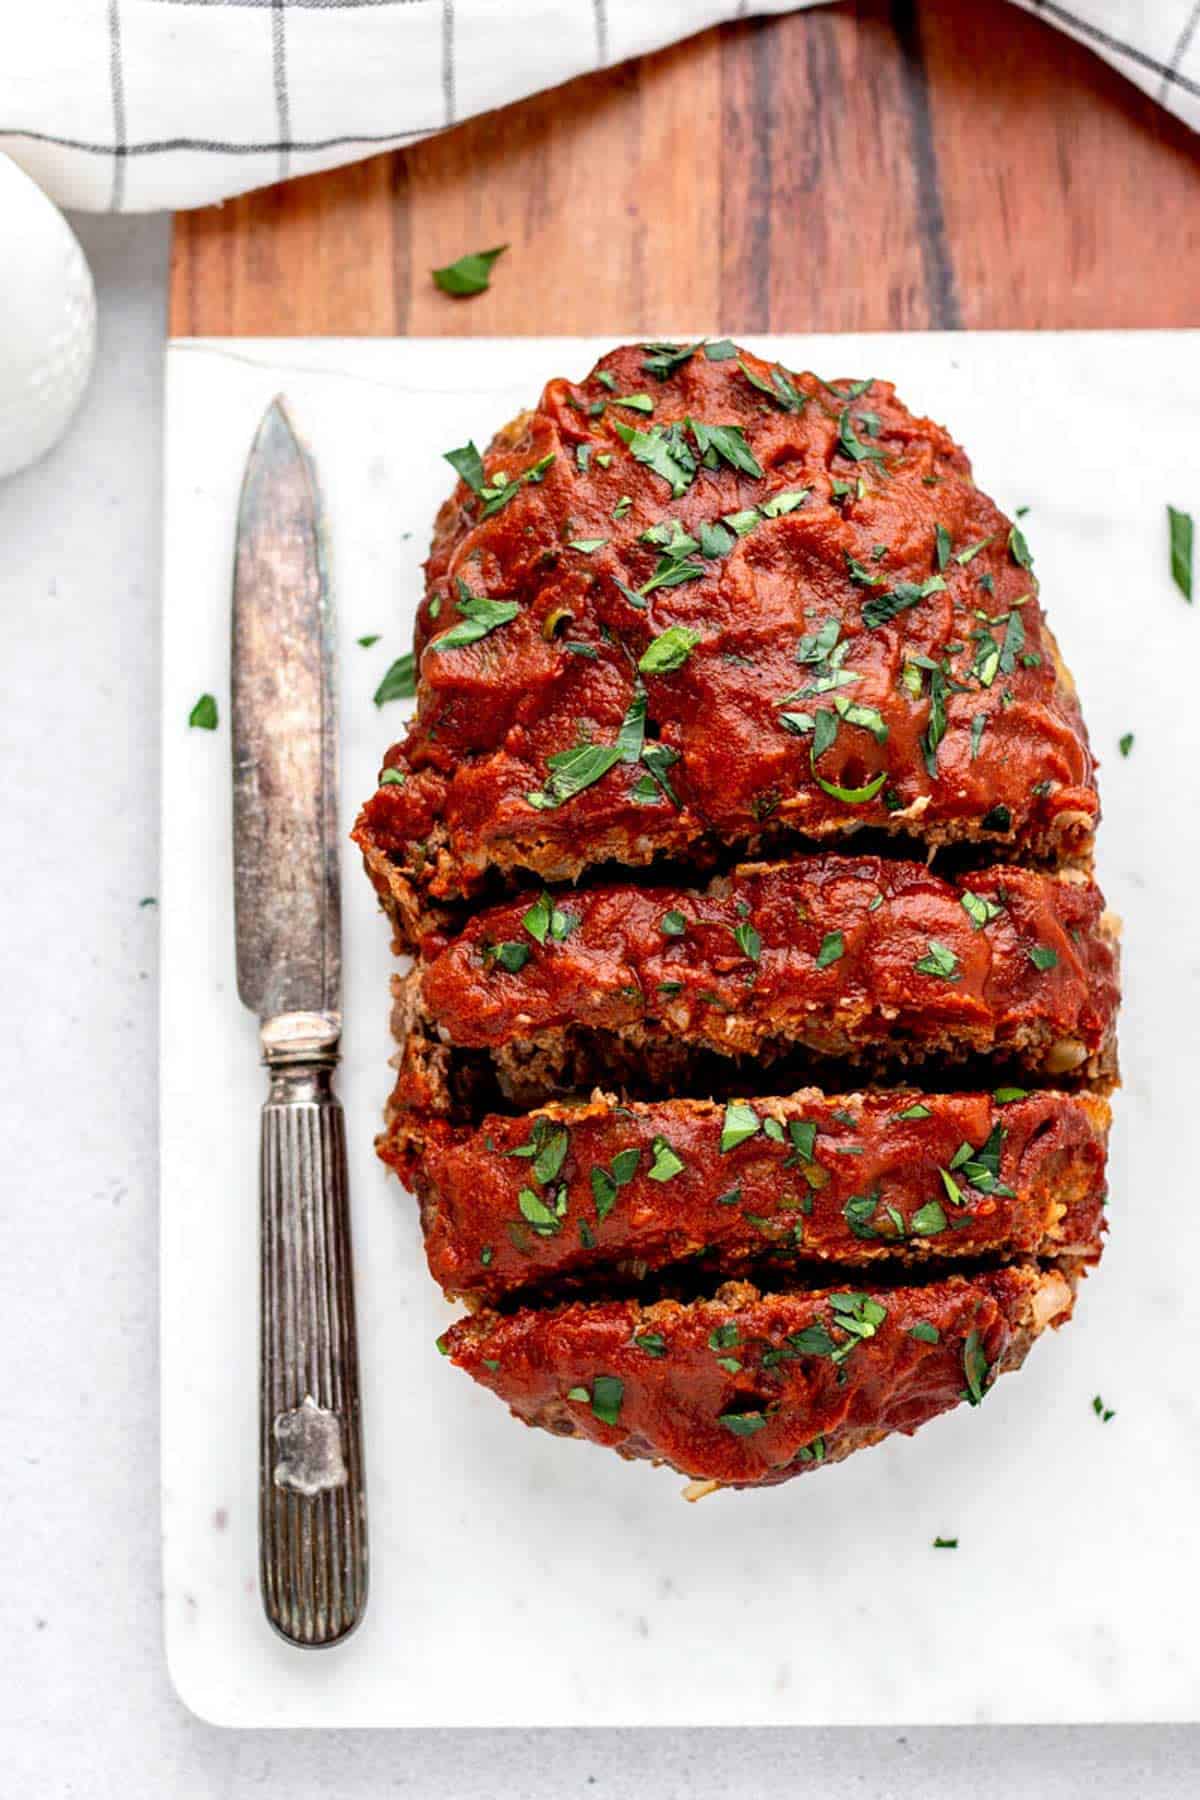 A sliced meatloaf on a cutting board.